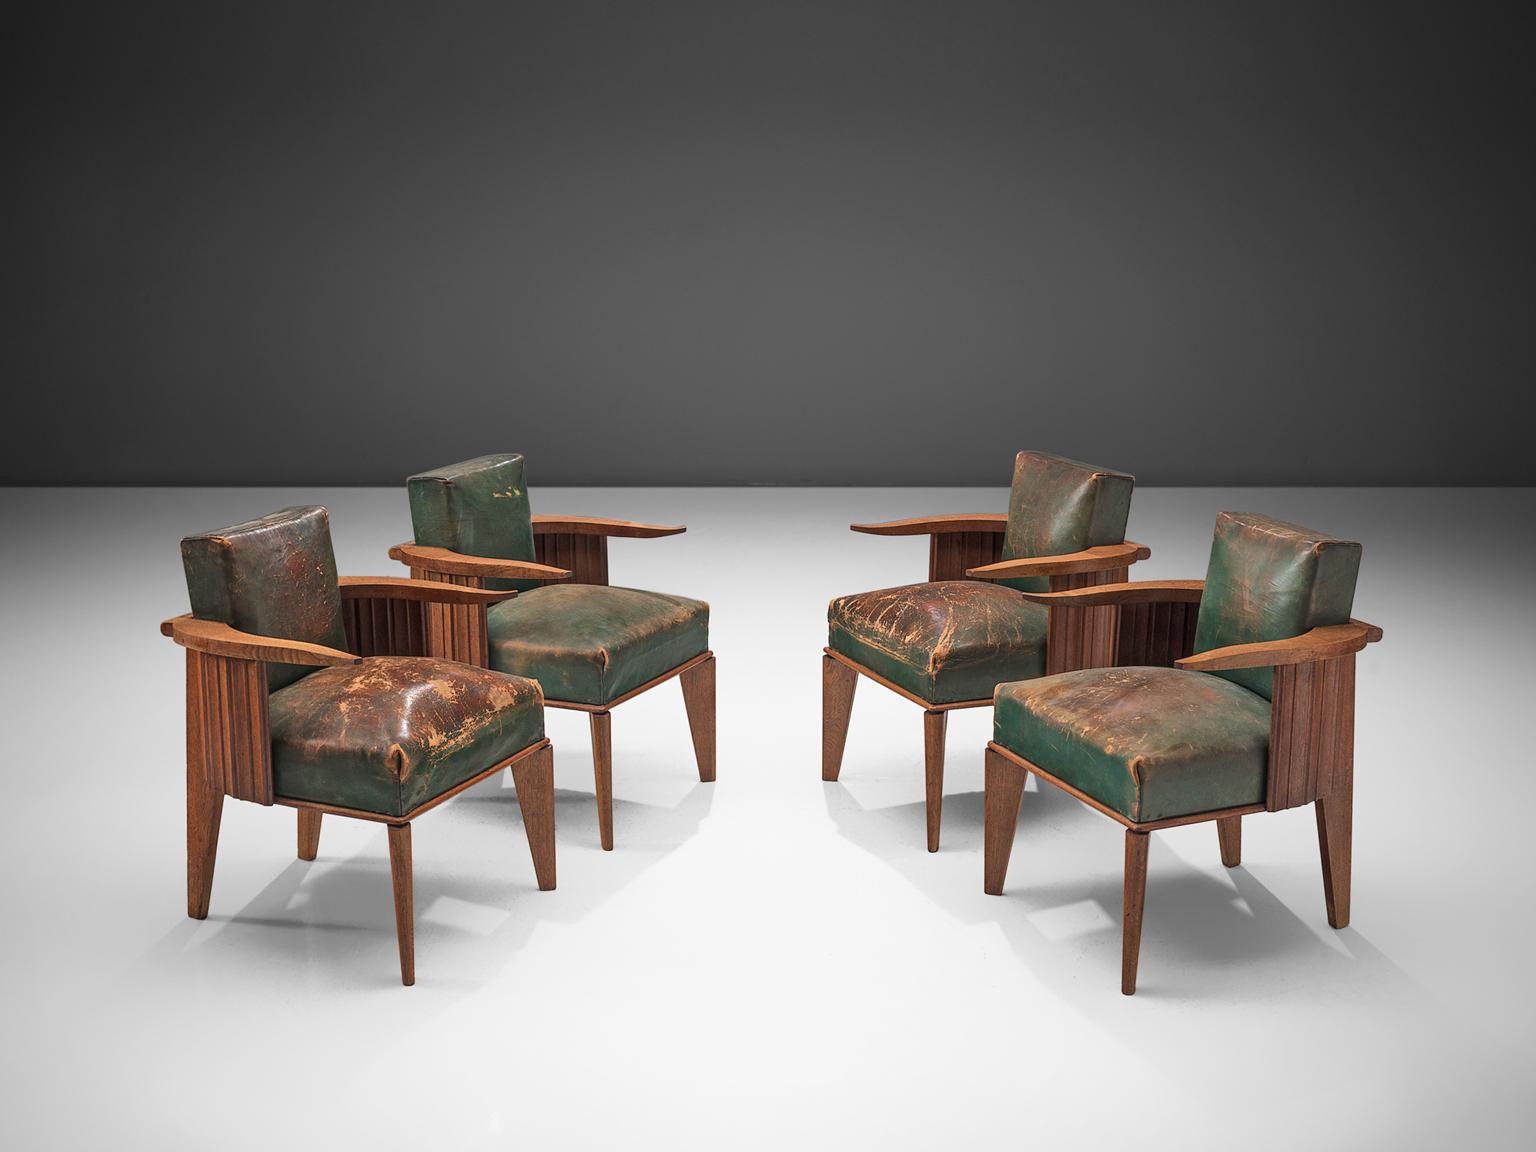 Set of four French/ Belgium easy chairs in wood and patinated green leather, France, 1920s. 

This unique design features cow horn-shaped armrests, thick cushions and carved, closed sides. The two legs in the front of the chair are slightly turned